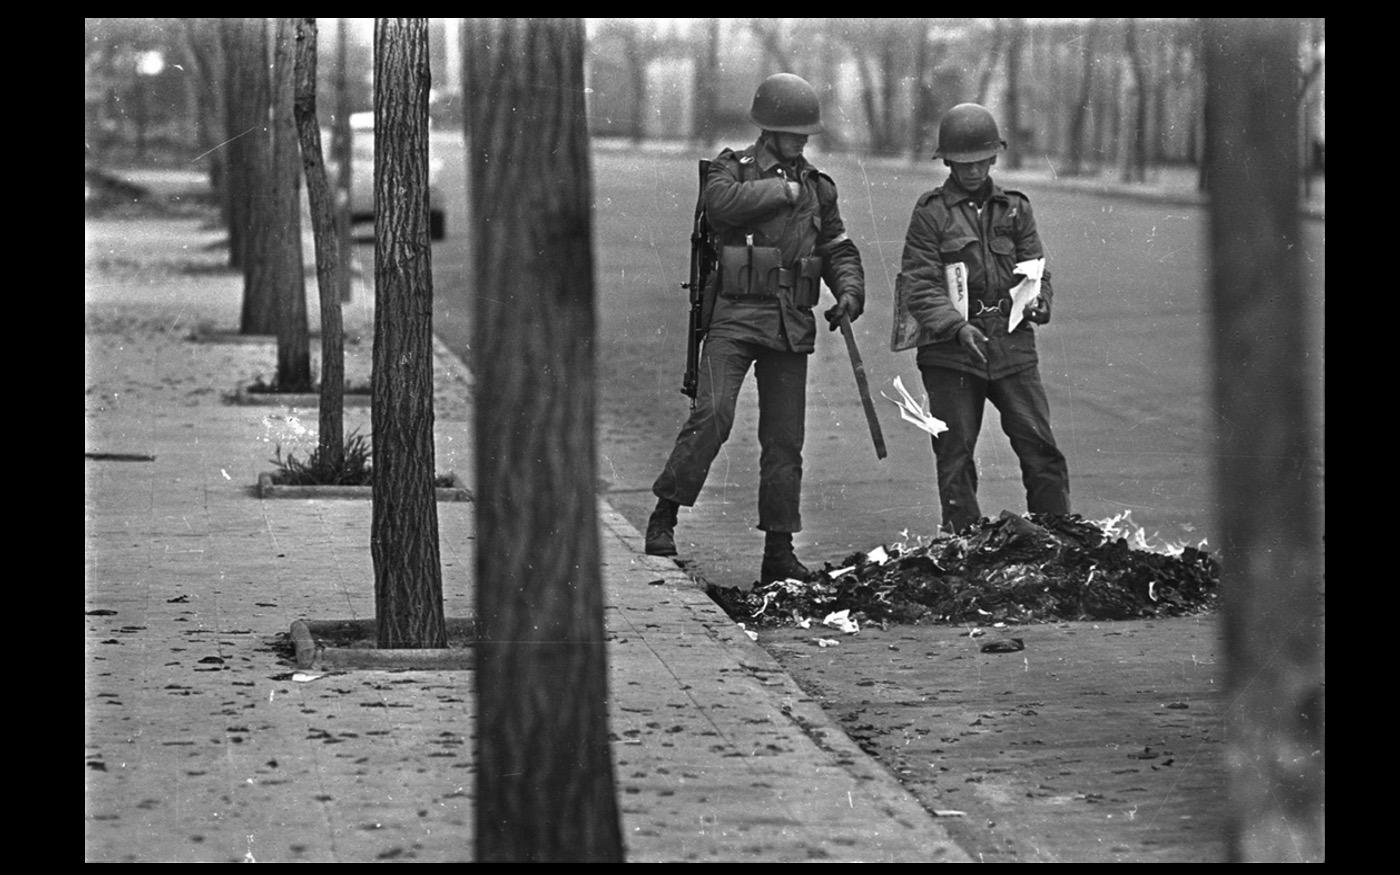 Following the coup d'Etat against President Allende the Chilean Army burns "suspicious" books   Santiago 1973 : Looking Back: 60 Years of Photographs : David Burnett | Photographer